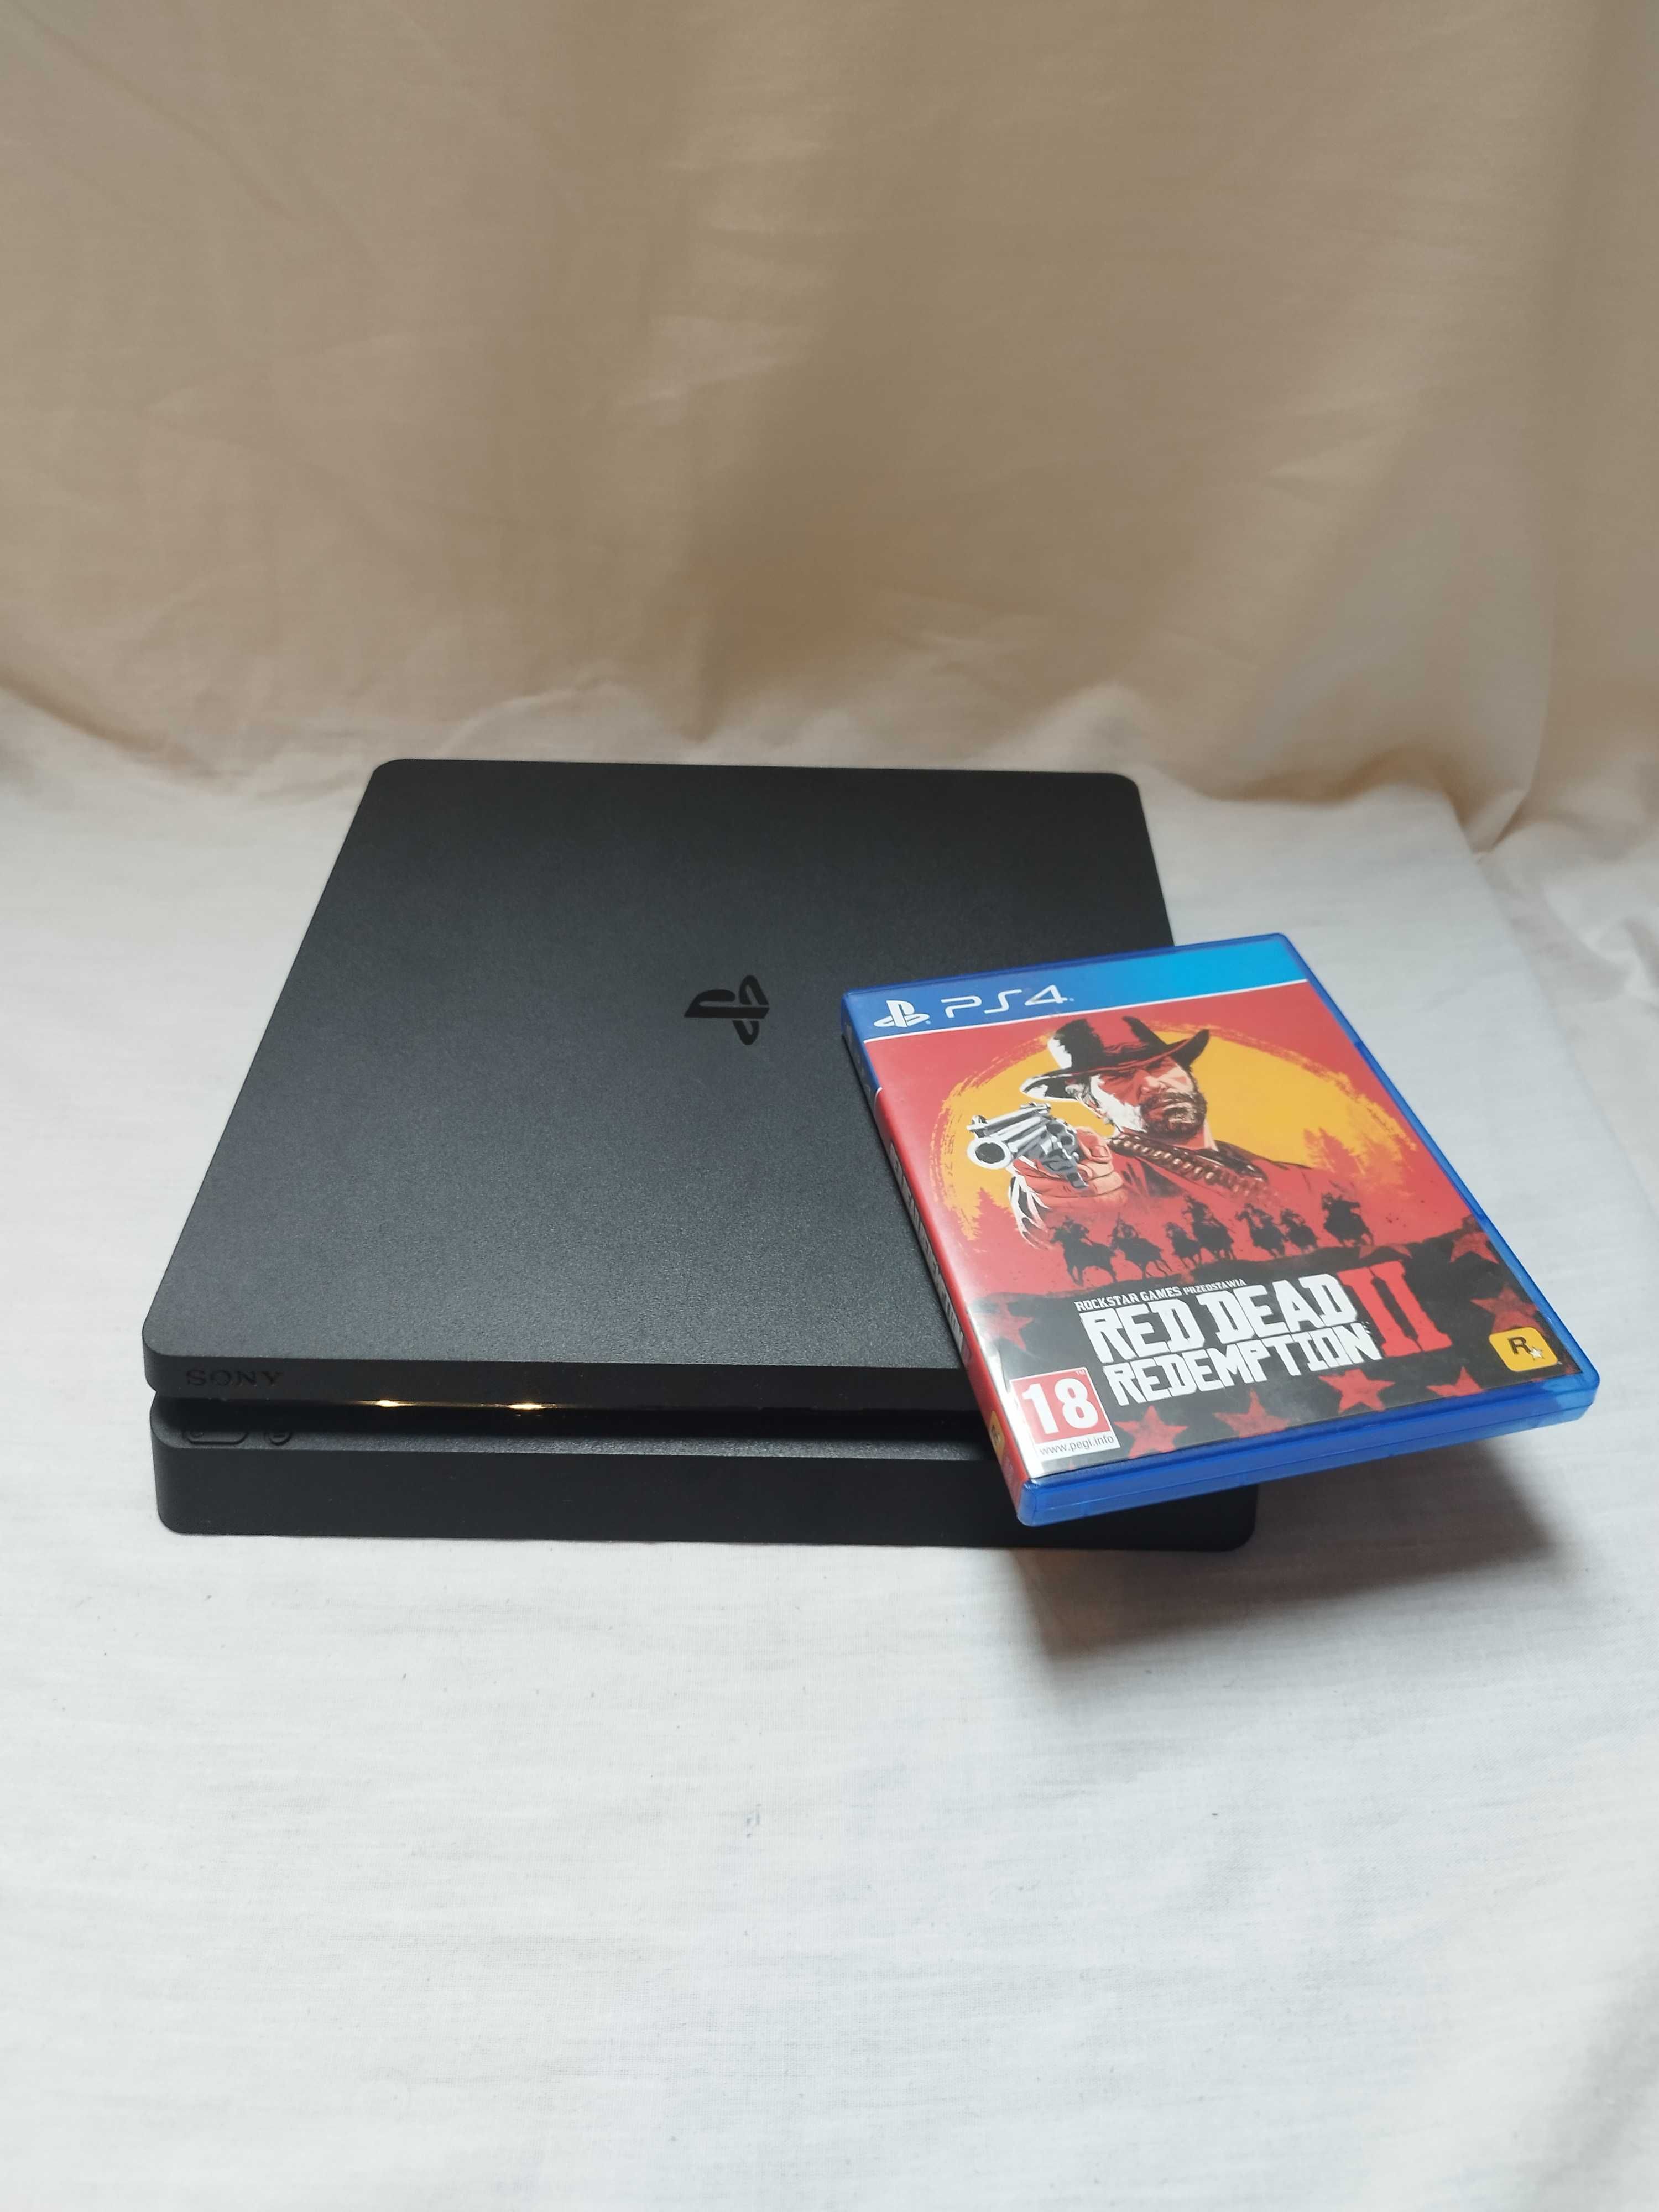 PlayStation 4 PS4 500GB + Red Dead Redemption II